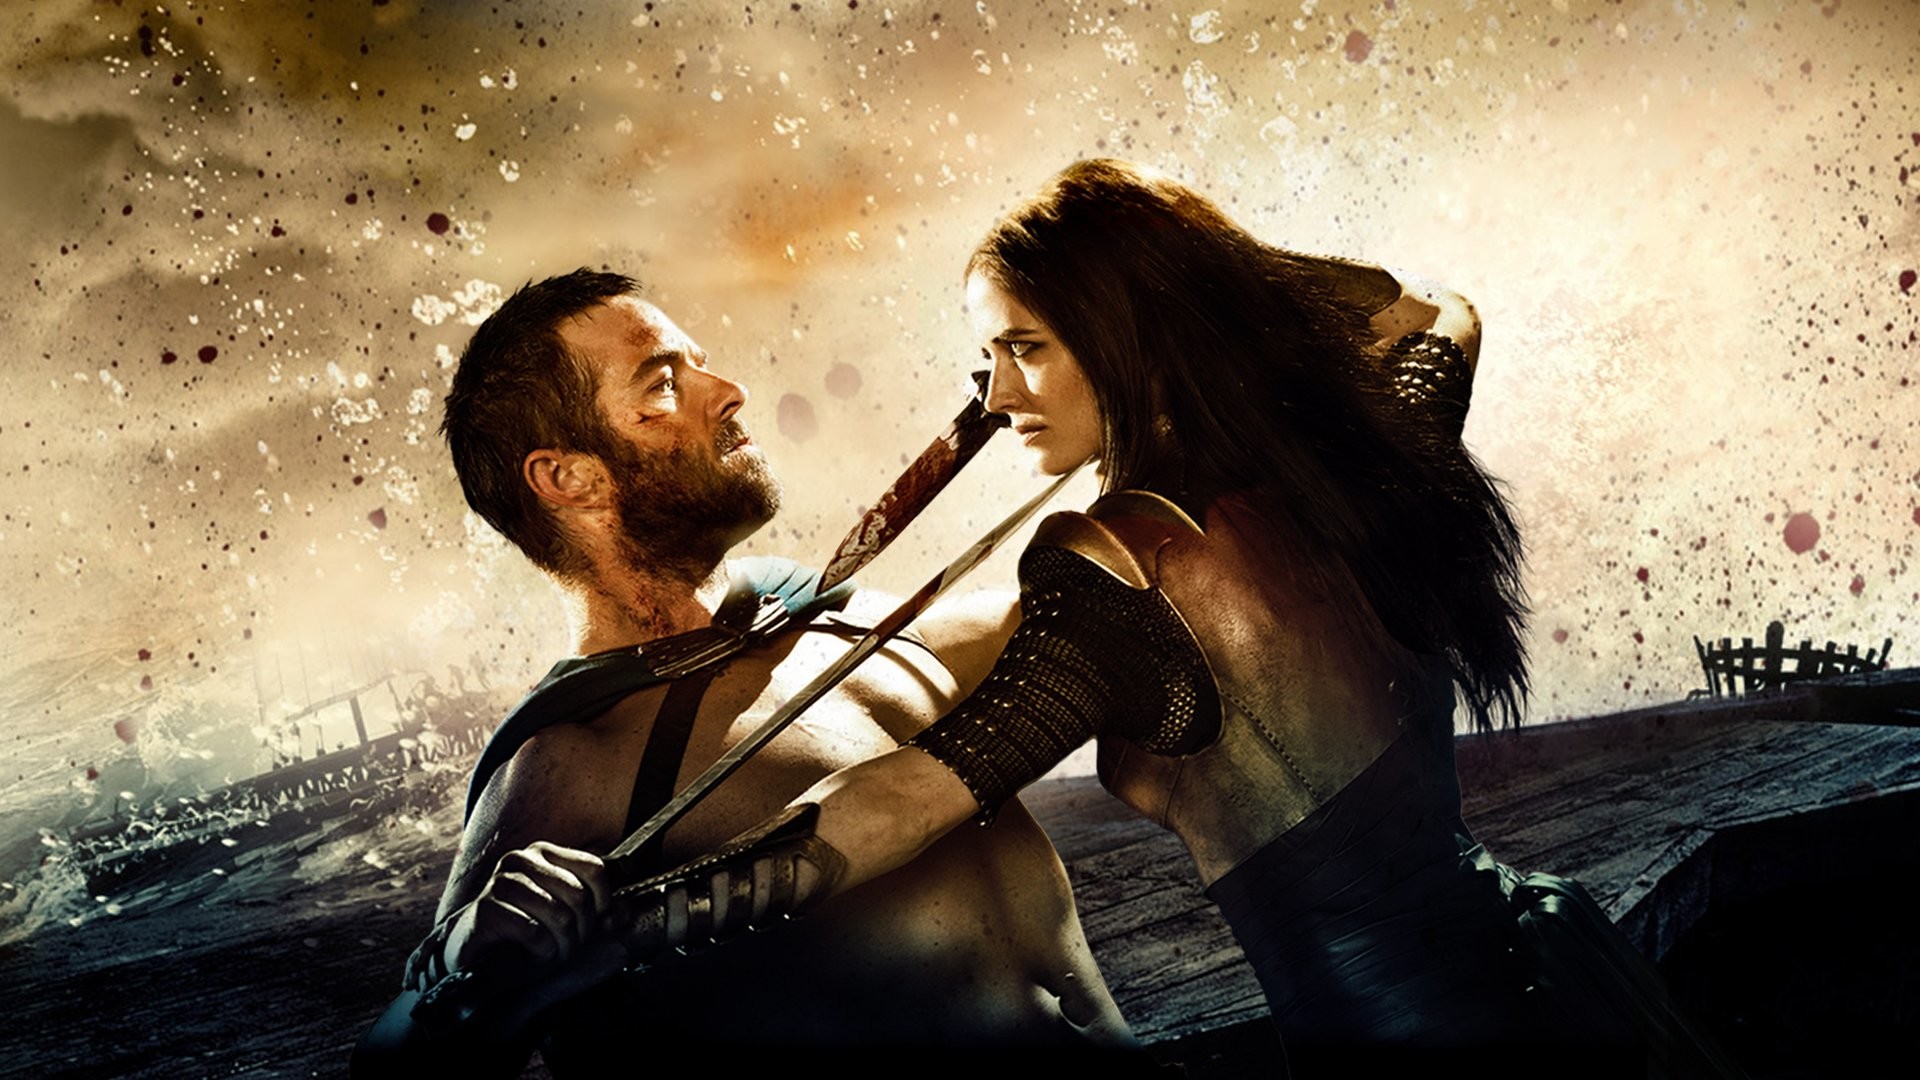 1920x1080 300 RISE OF AN EMPIRE action drama fighting warrior fantasy spartan .